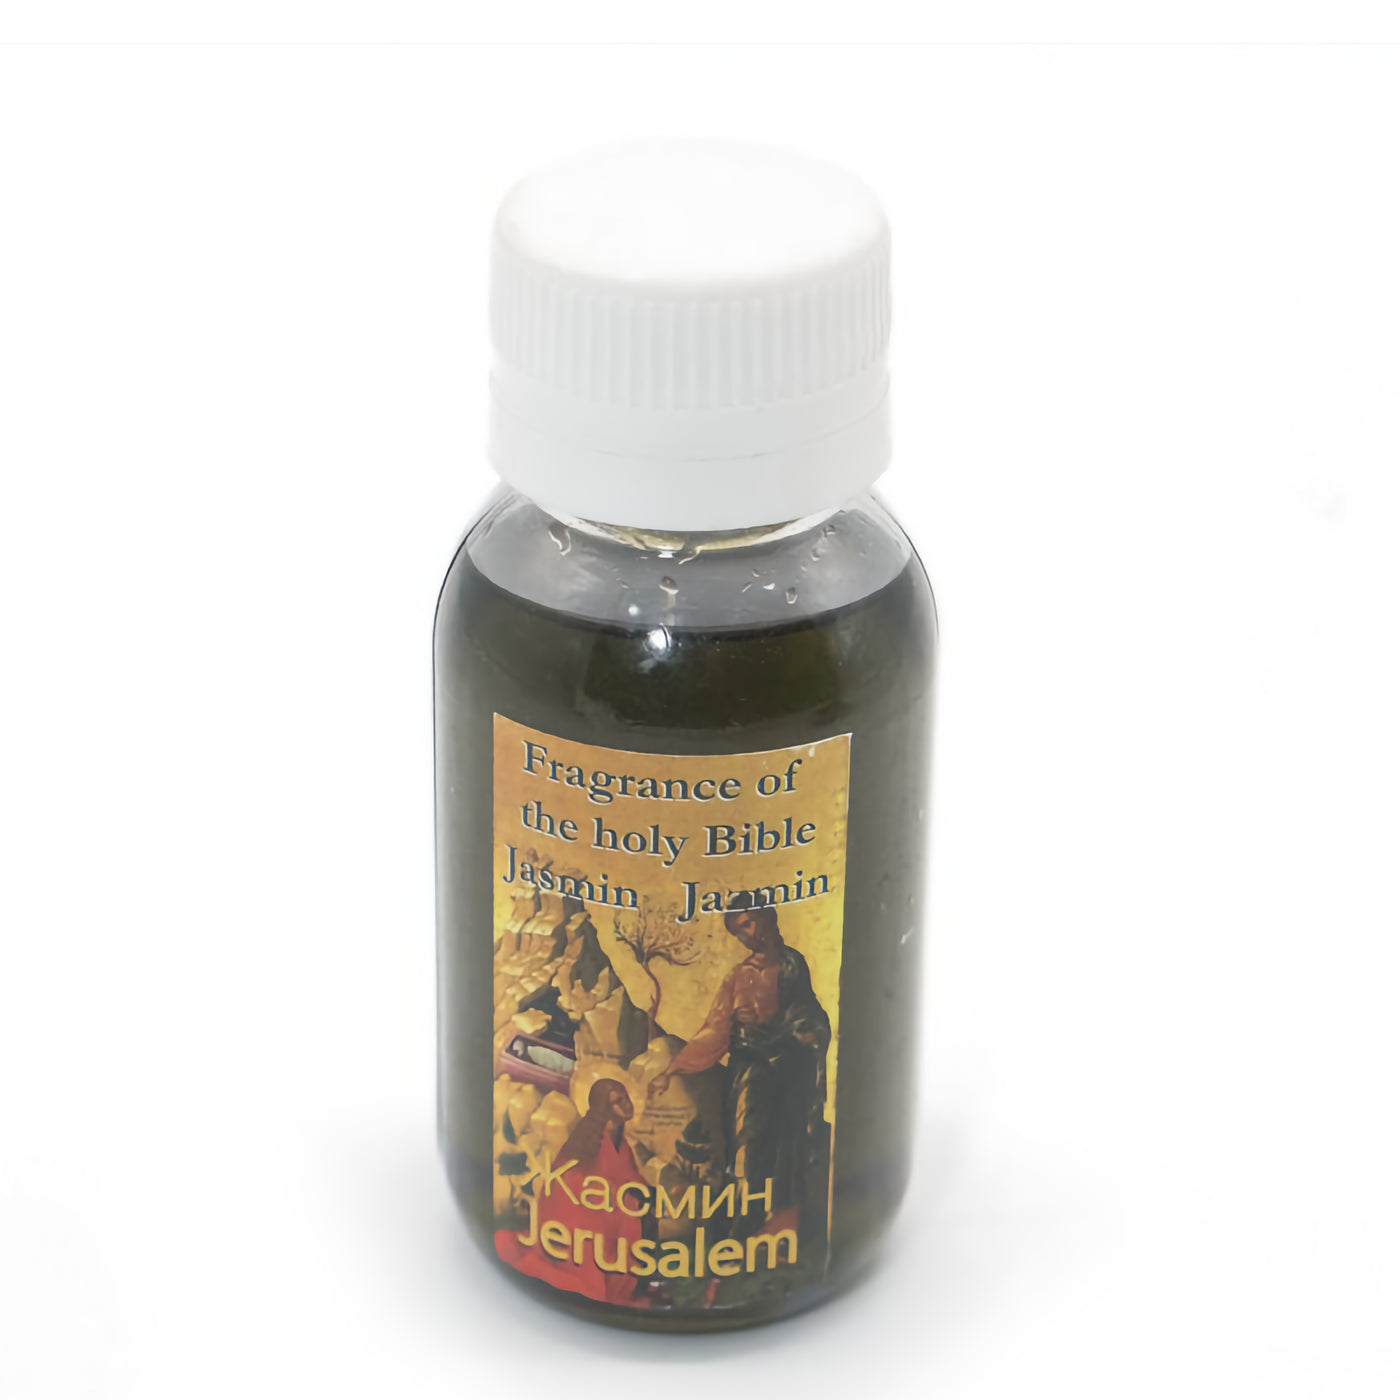 Jasmin Anointing Oil 60 ml. - 2.02 oz. Bottle from The Holy Bible Jerusalem